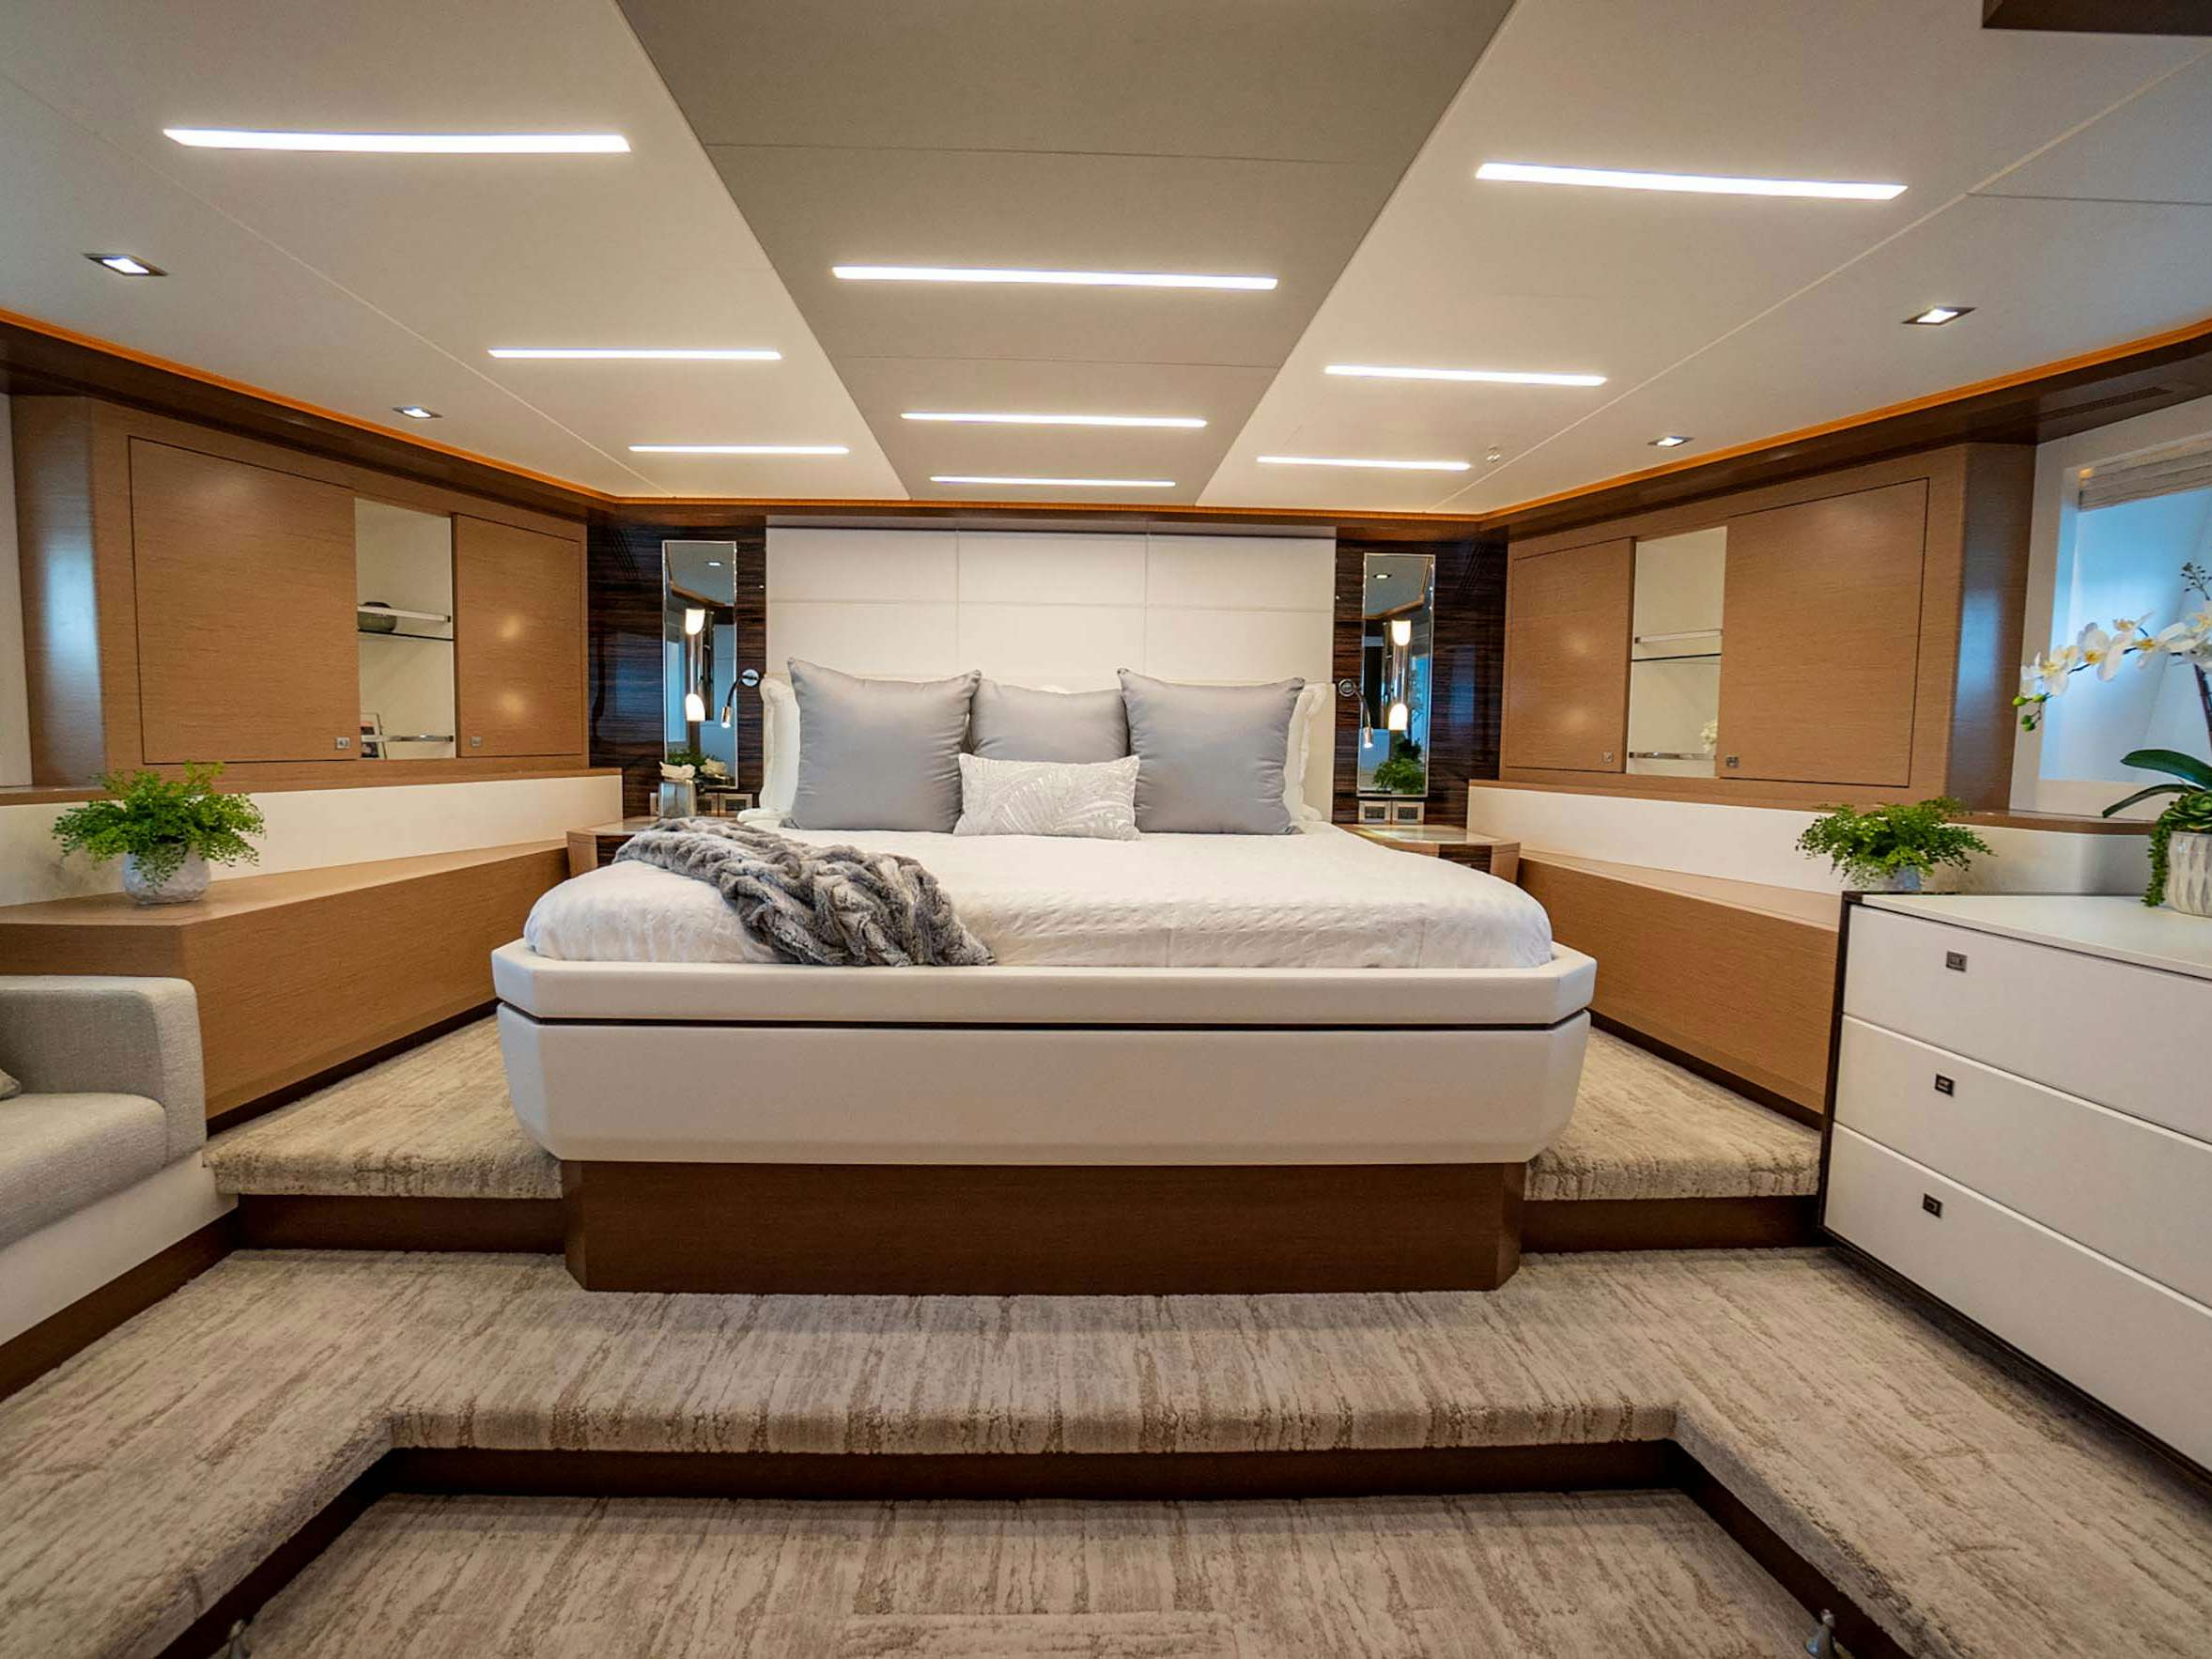 VIP stateroom on charter yacht for 8 to 8 guests featuring a queen bed